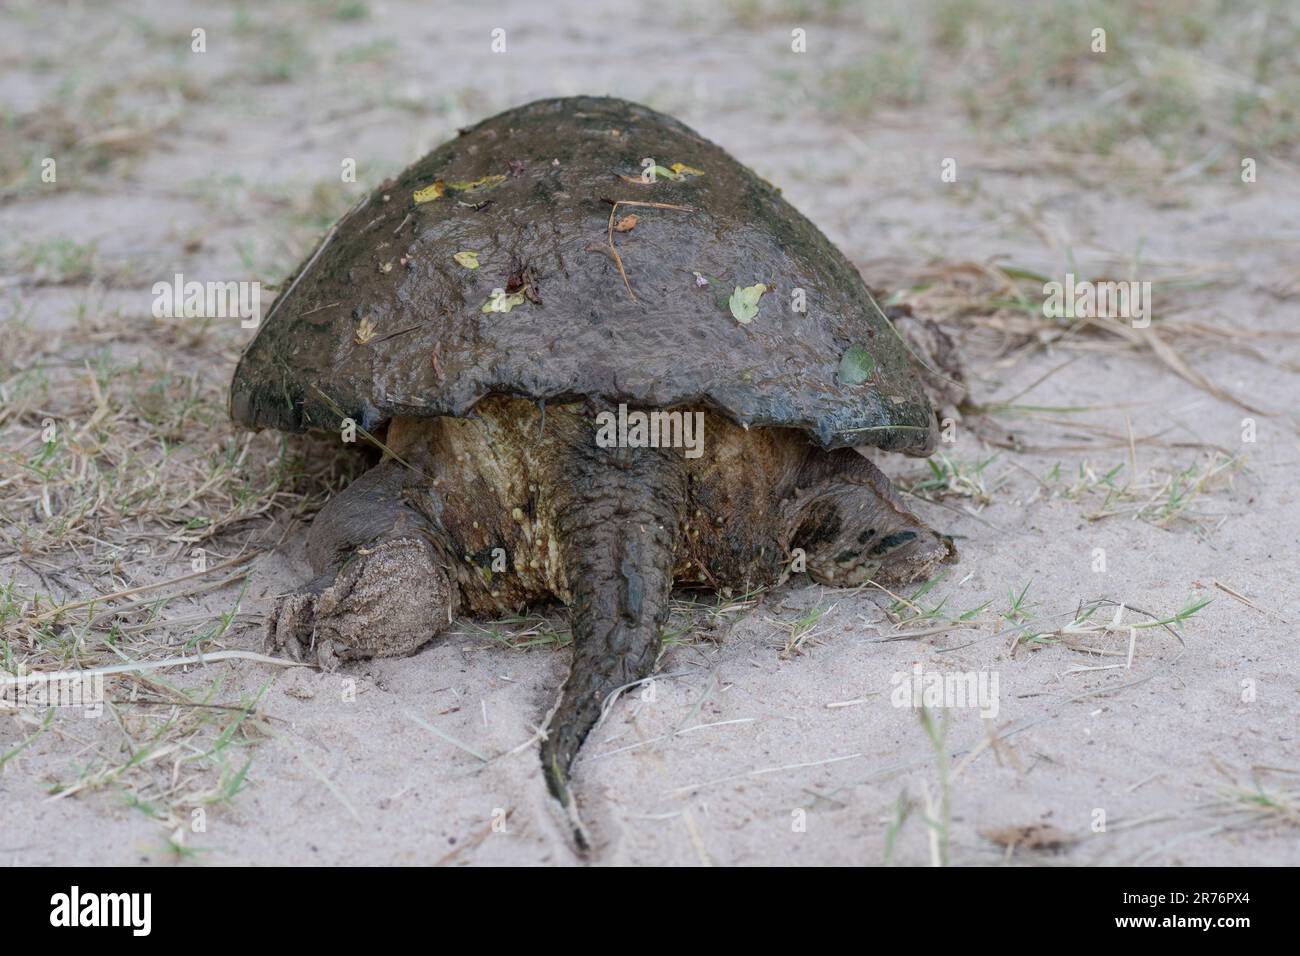 Rear view of the hind legs and tail of a common snapping turtle, Chelydra serpentina. Stock Photo